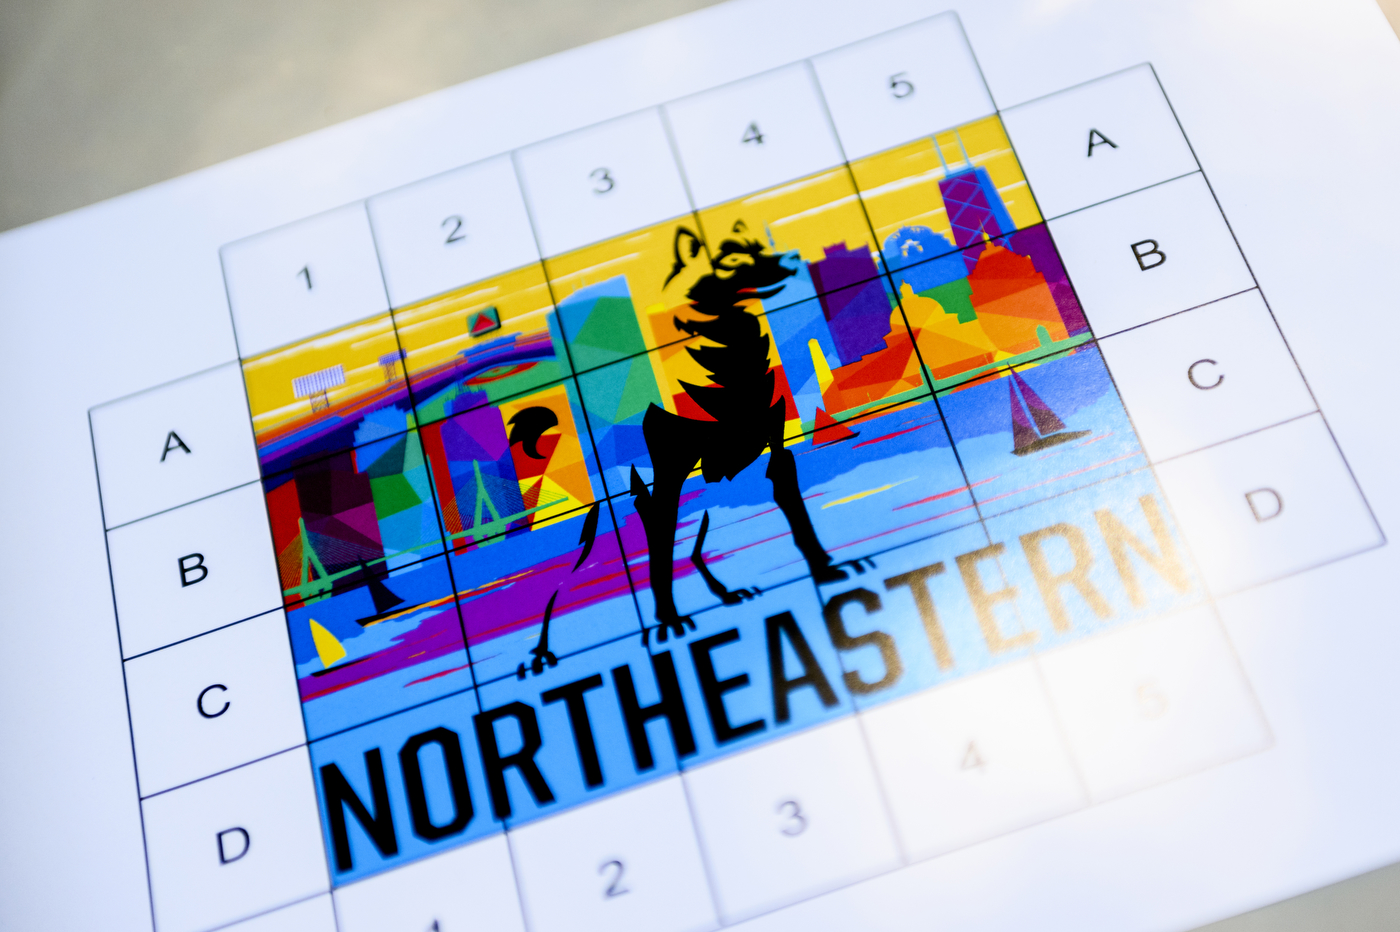 A multi-colored board with various letters and black text: "Northeastern".